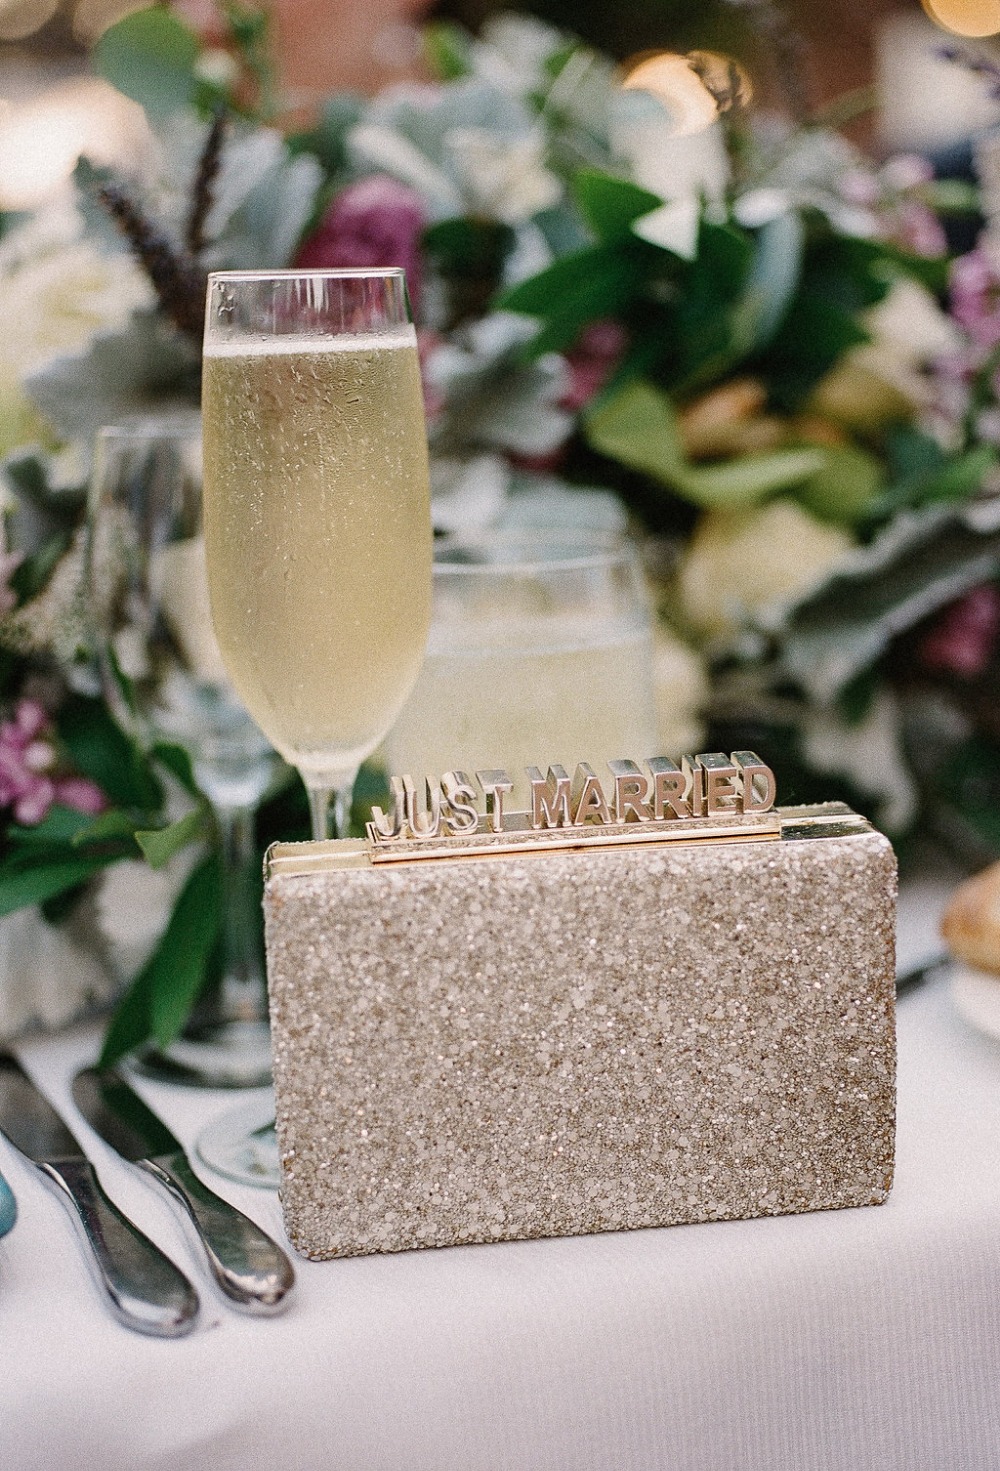 Sparkly gold just married clutch